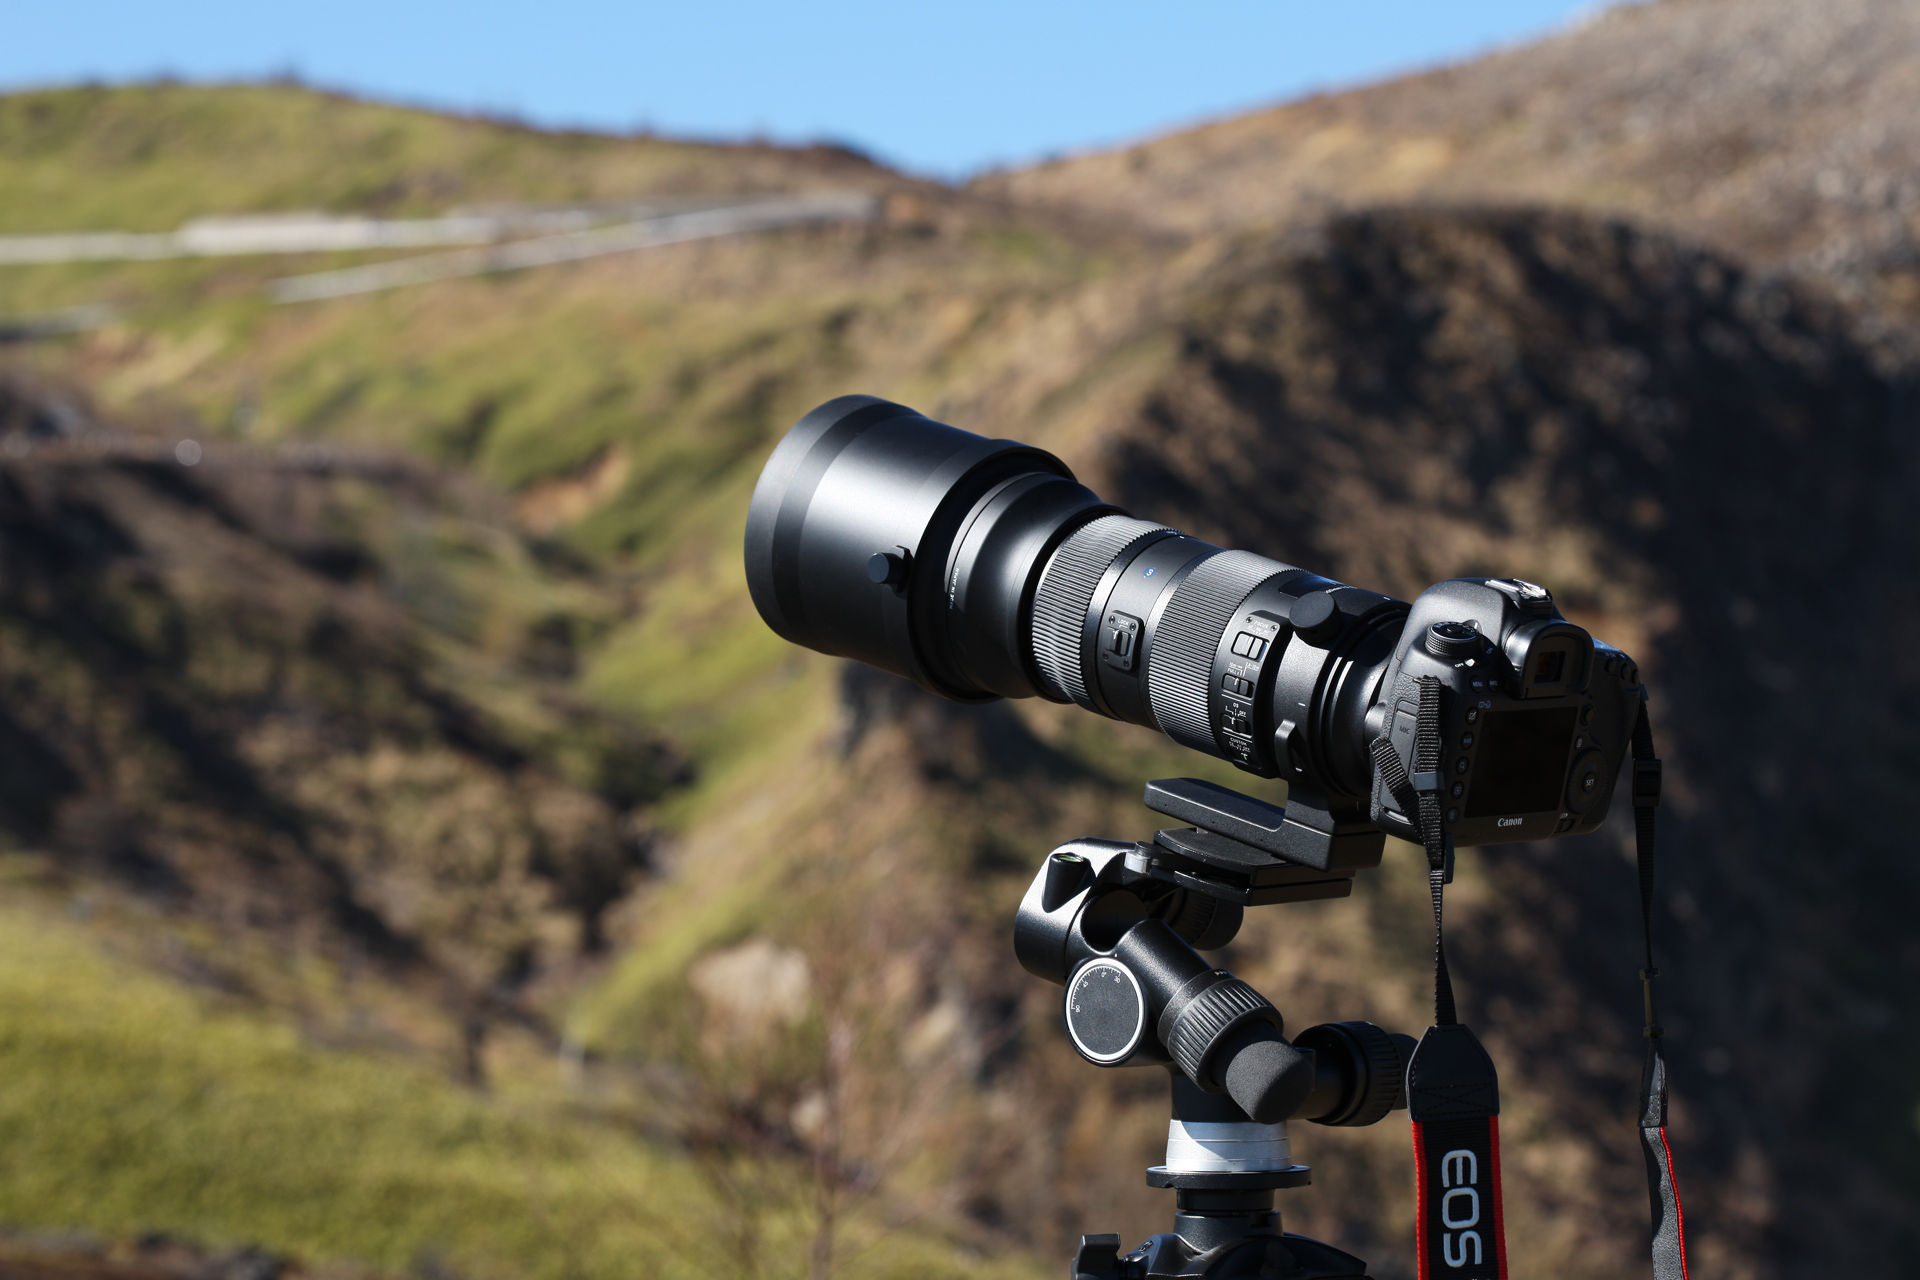 SIGMA 150-600mm F5-6.3 DG OS HSM | Sports SHOOTING REPORT | PHOTO